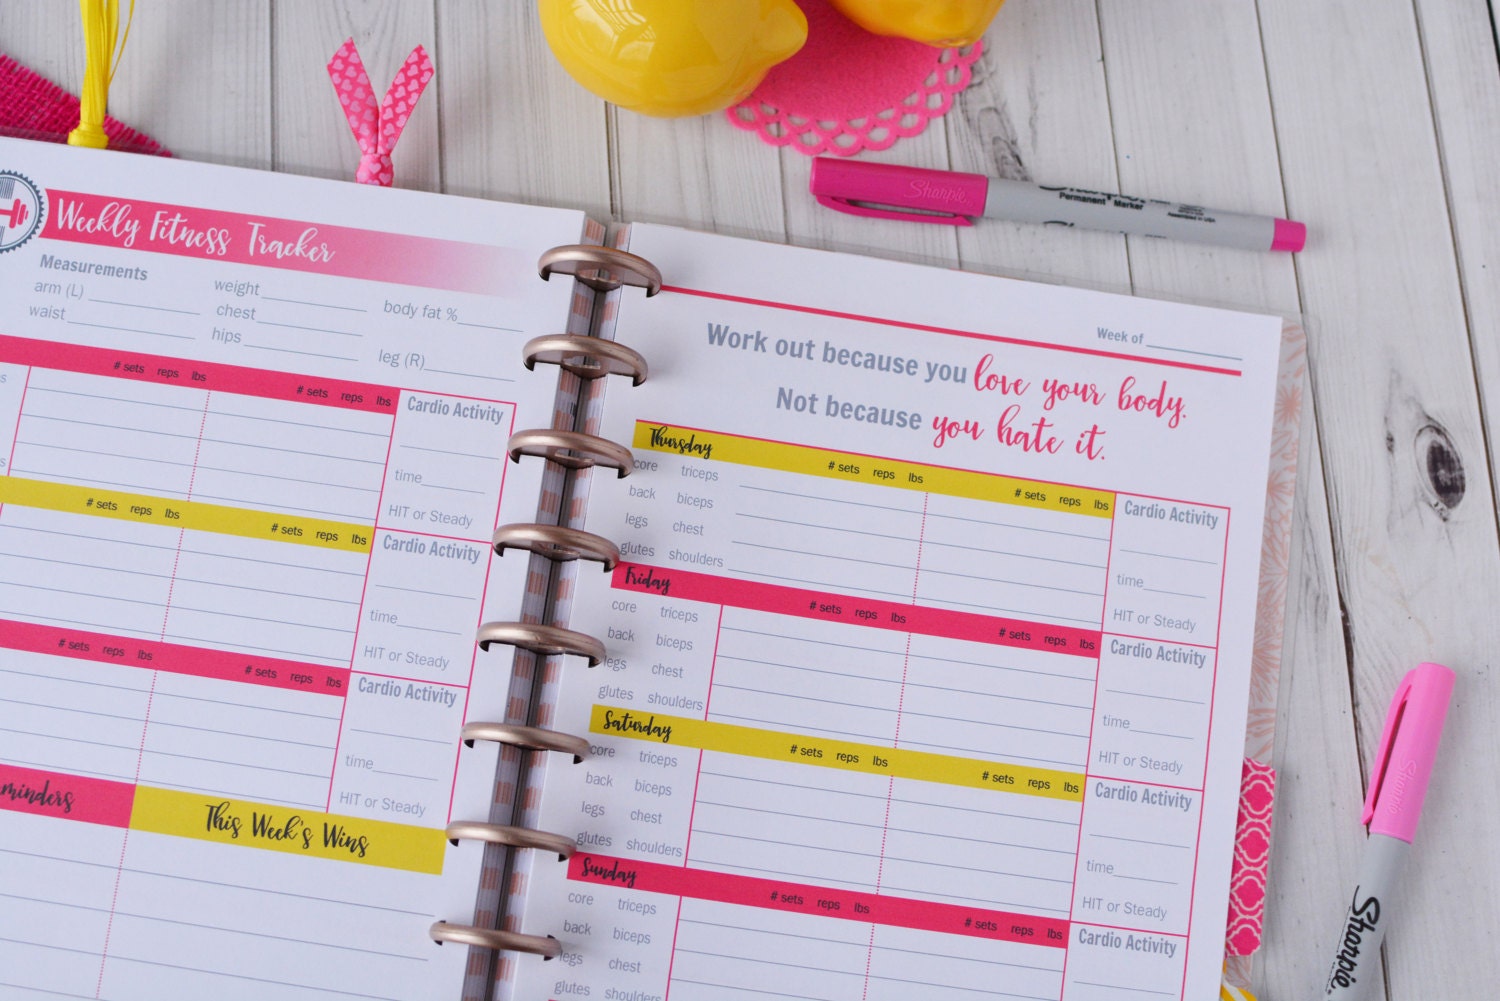 52 Wk Happy Planner FITNESS PLANNER Printable workout insert